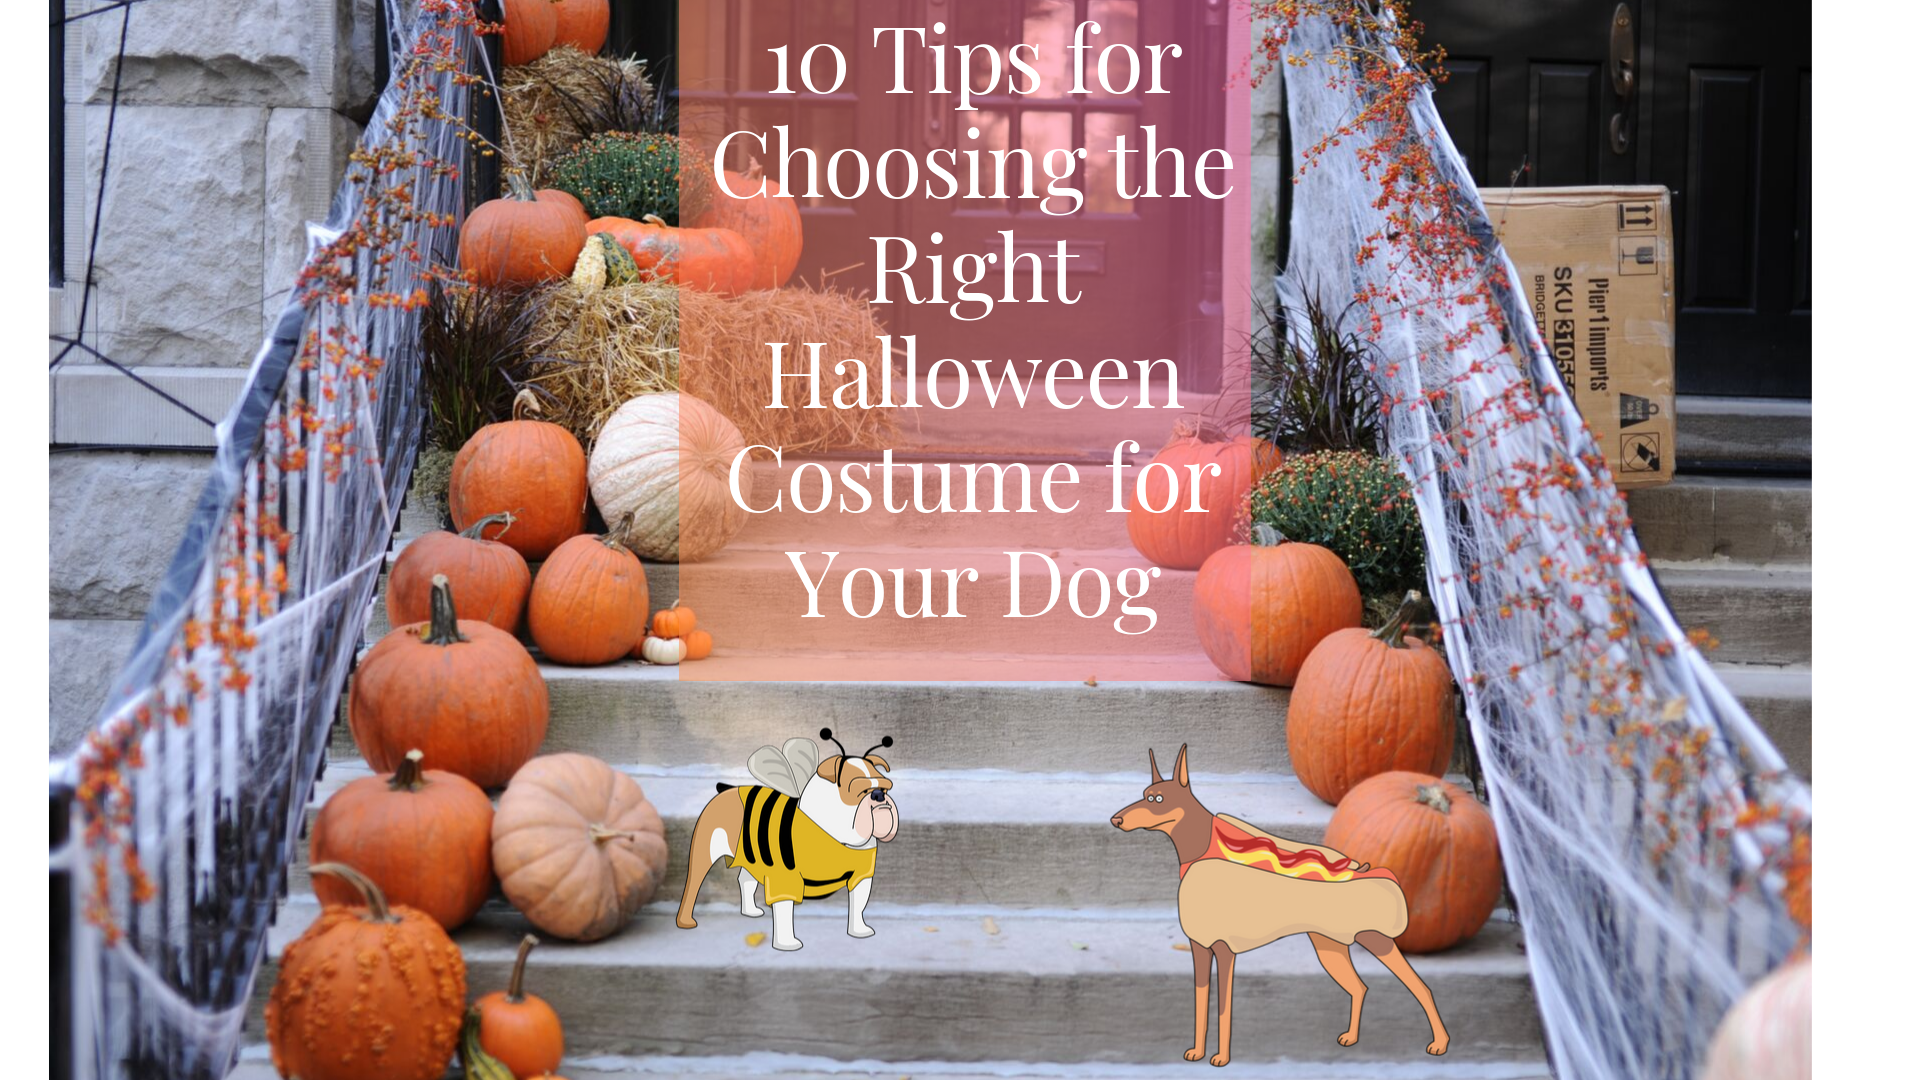 10 Tips for Choosing the Right Halloween Costume for Your Dog